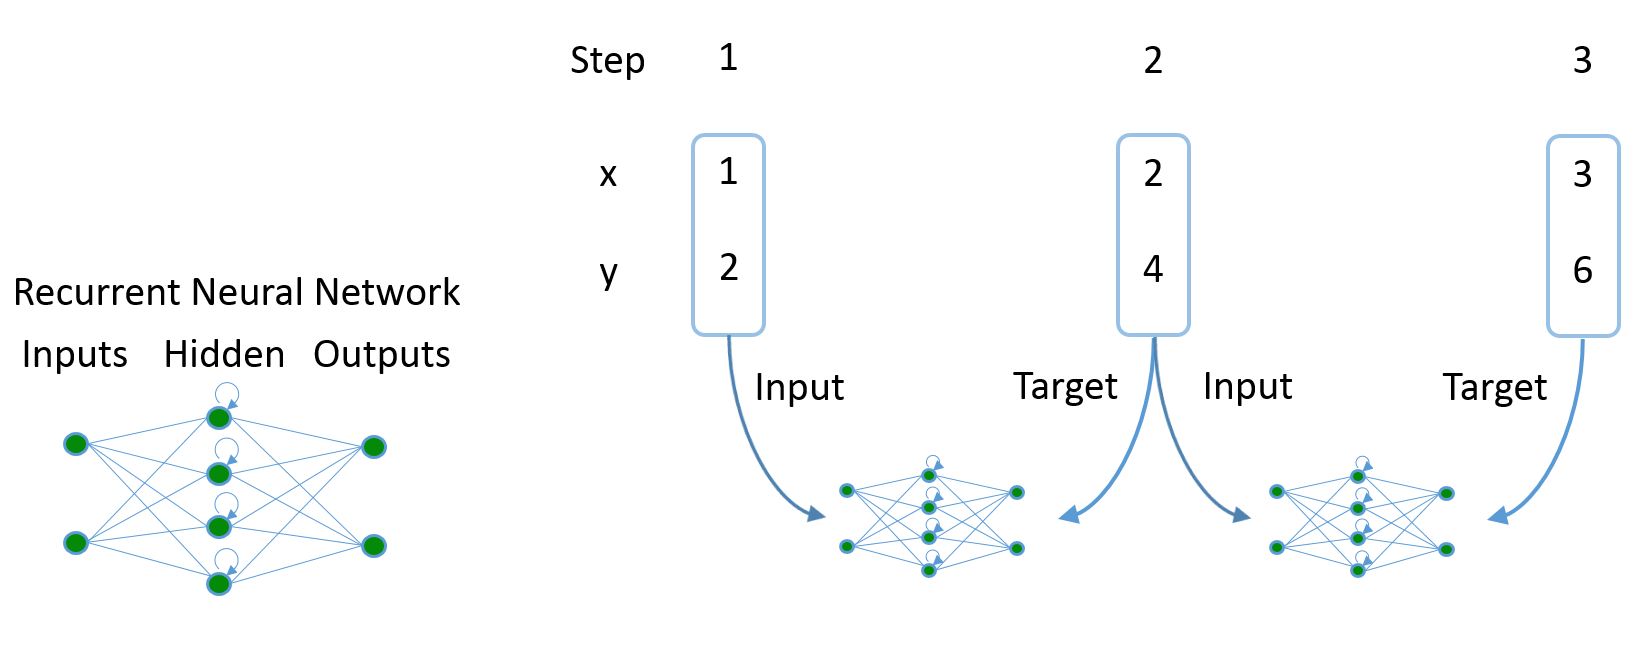 Sequence learning